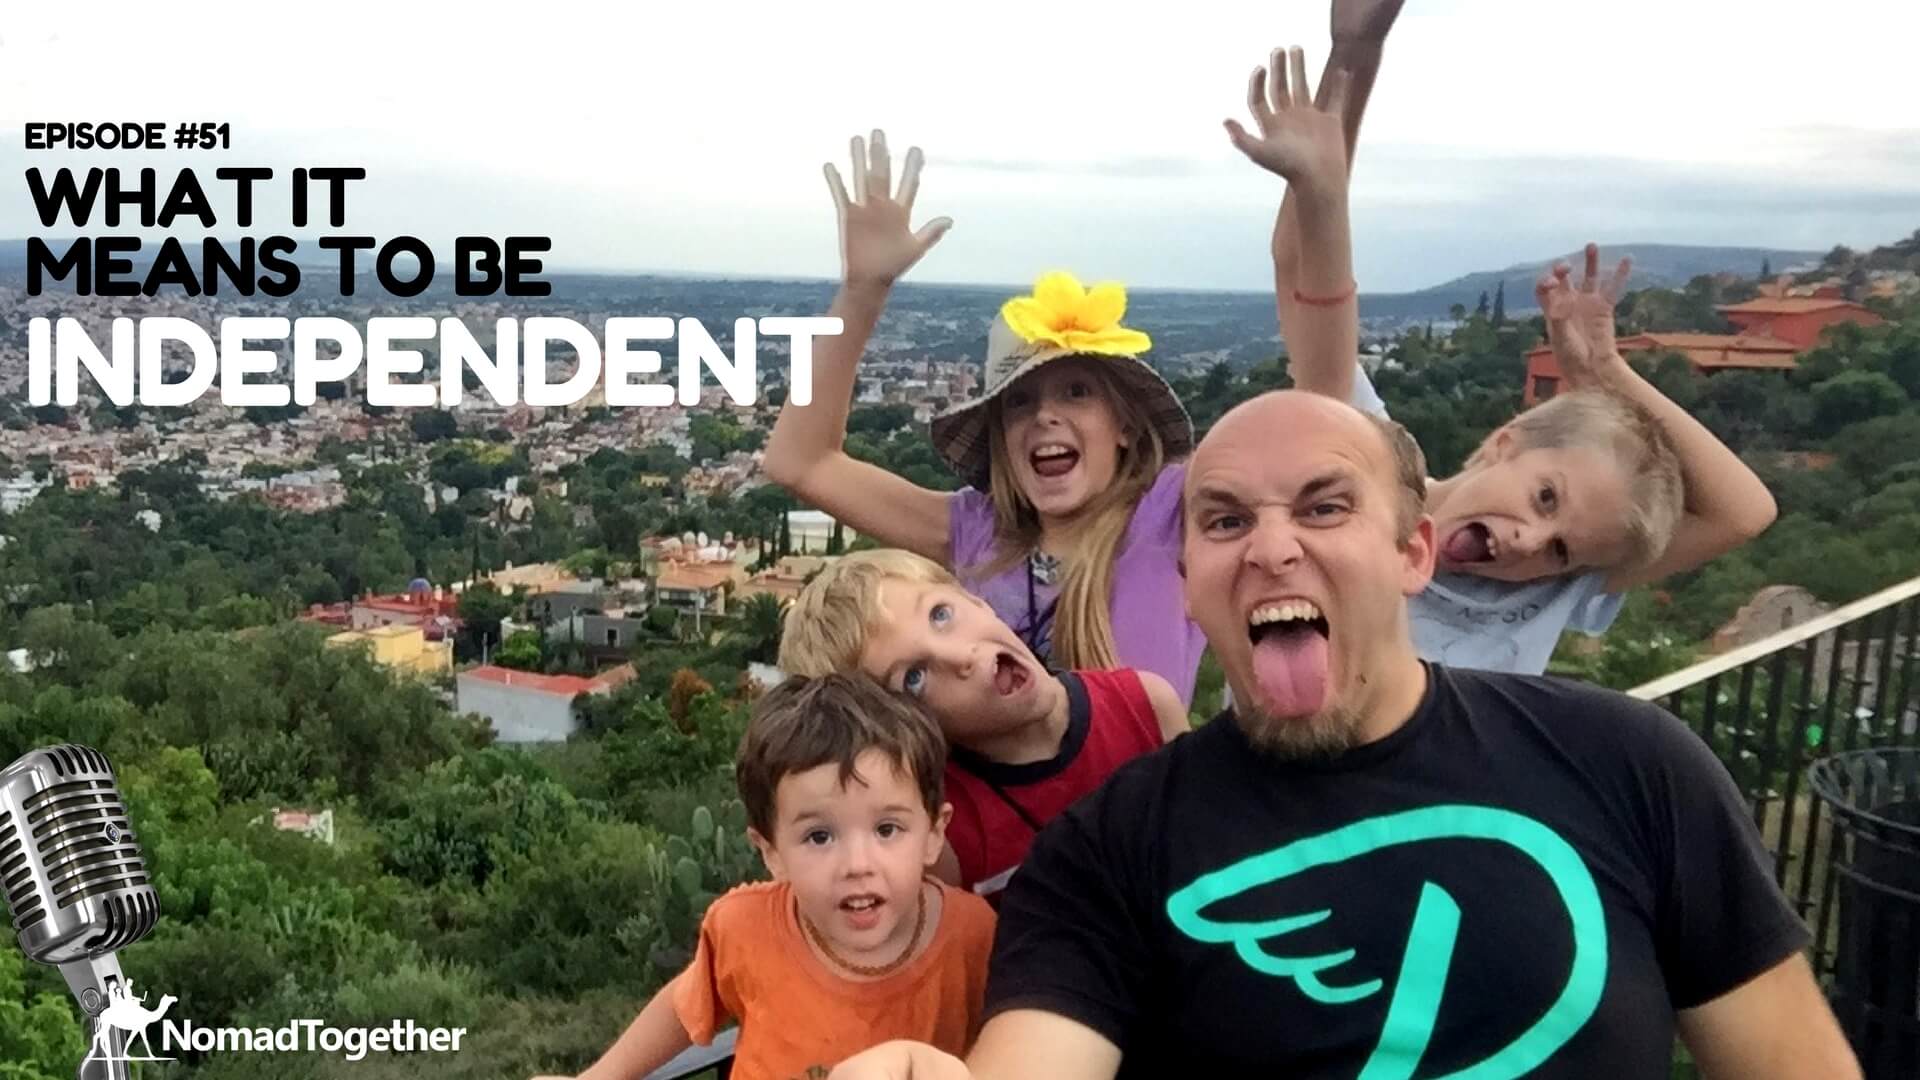 Episode #51: What it Means to be Independent with Paul & Becky!